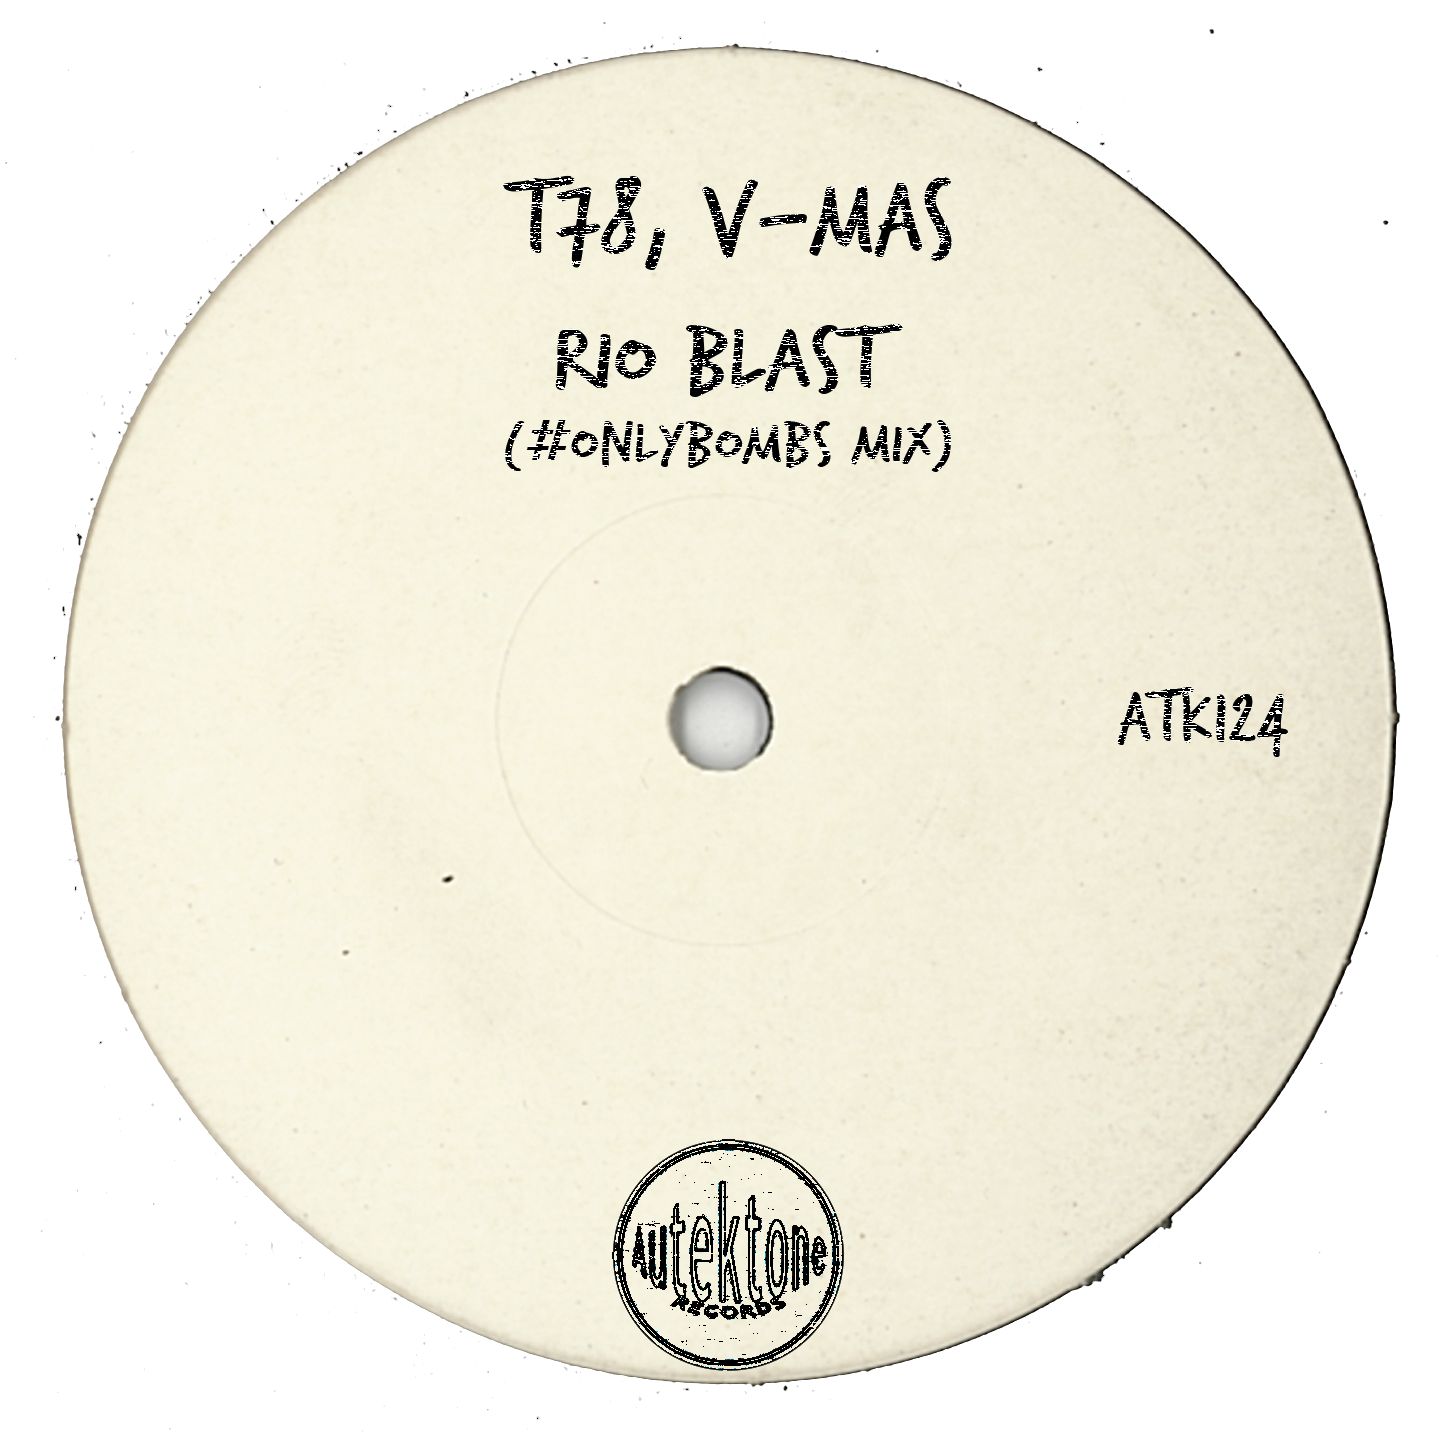 İndirmek ATK124 - T78, V-Mas "Rio Blast" (#onlybombs Mix)(Preview)(Autektone Records)(Out Now)